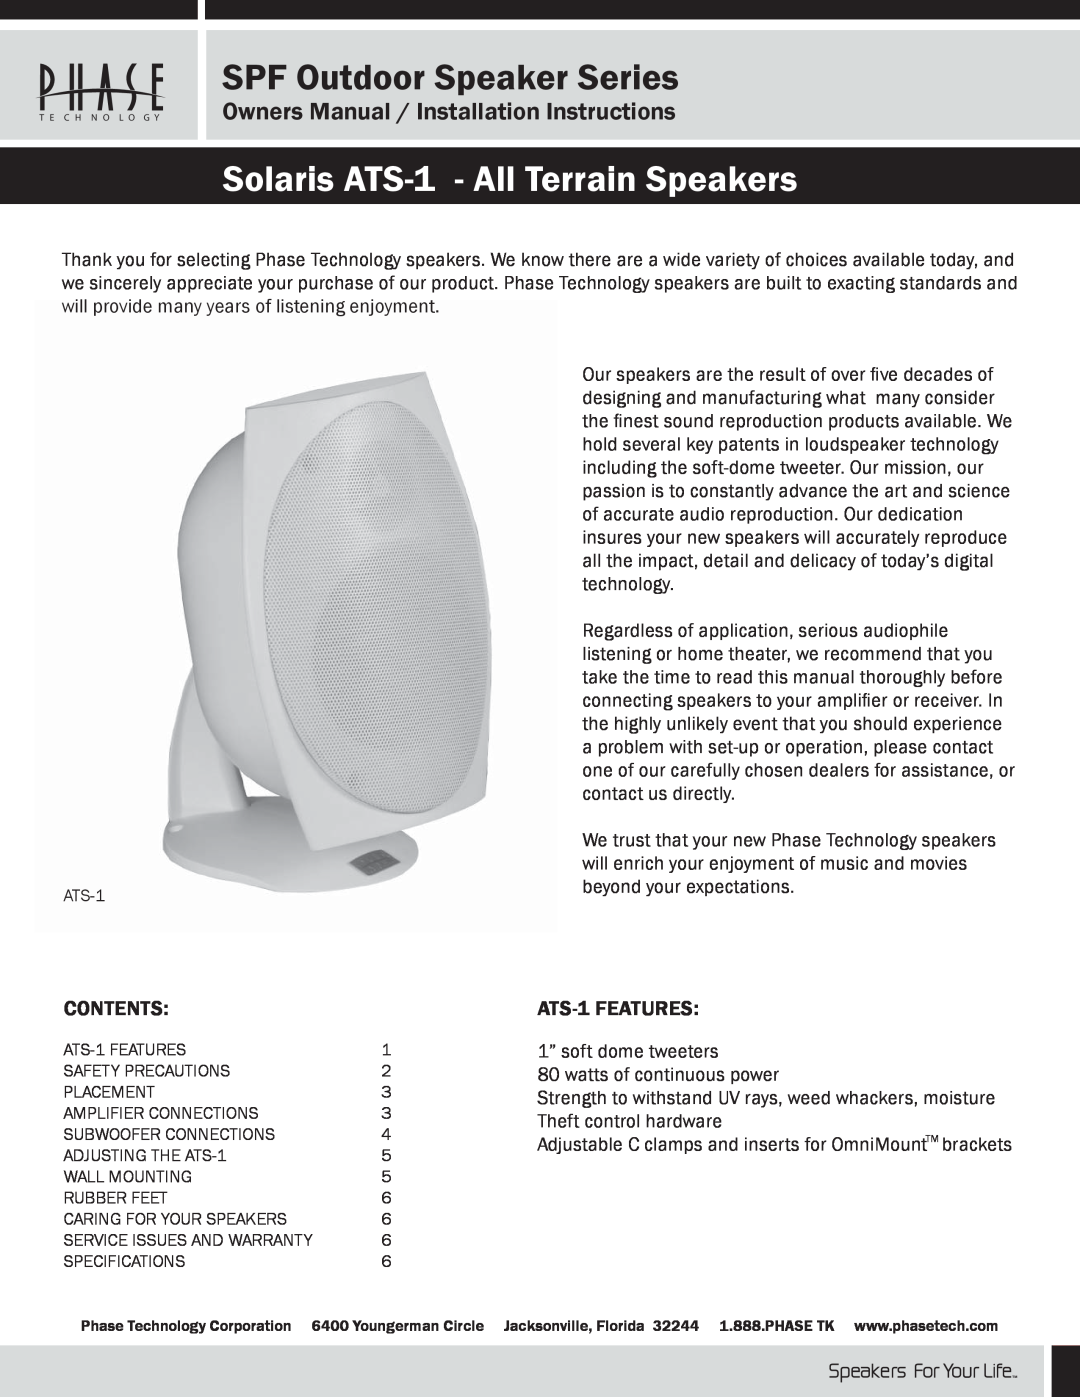 Phase Technology ATS-1 owner manual Contents, SPF Outdoor Speaker Series 